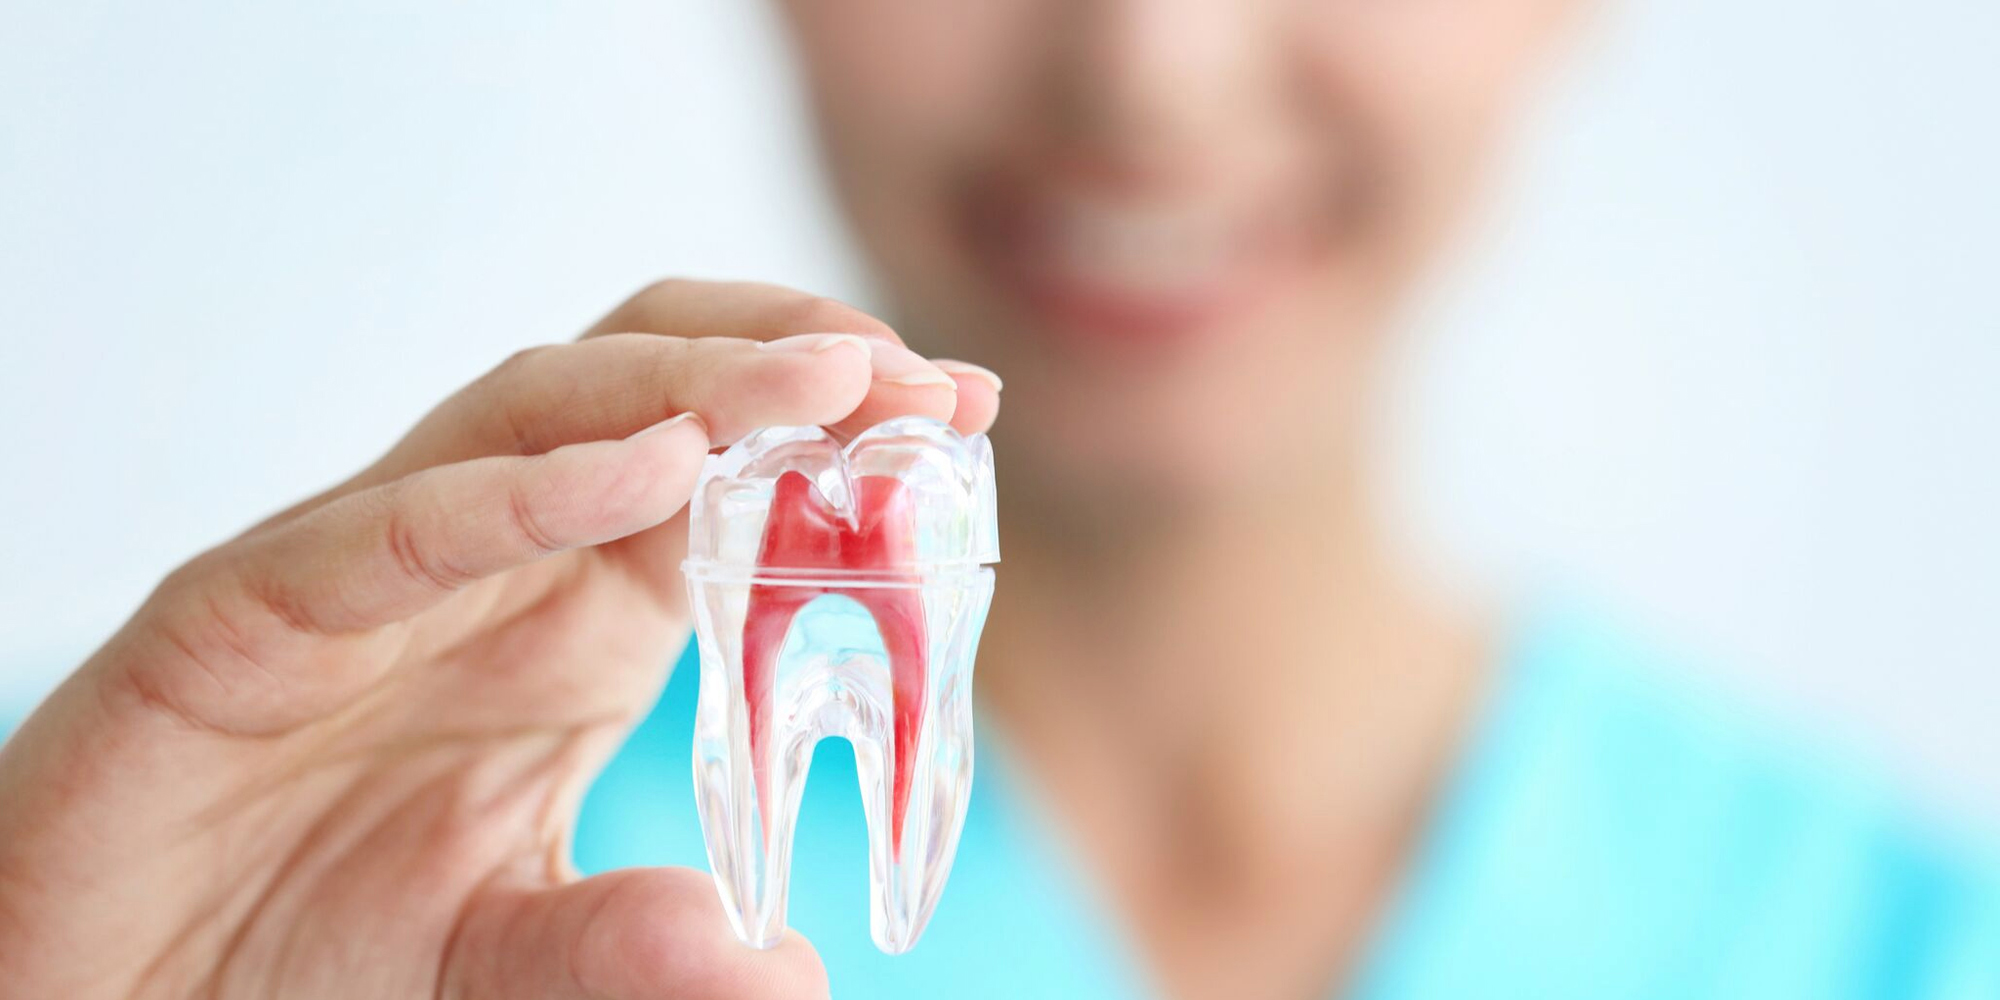 Restore Dental Health with The Root Canal Treatment